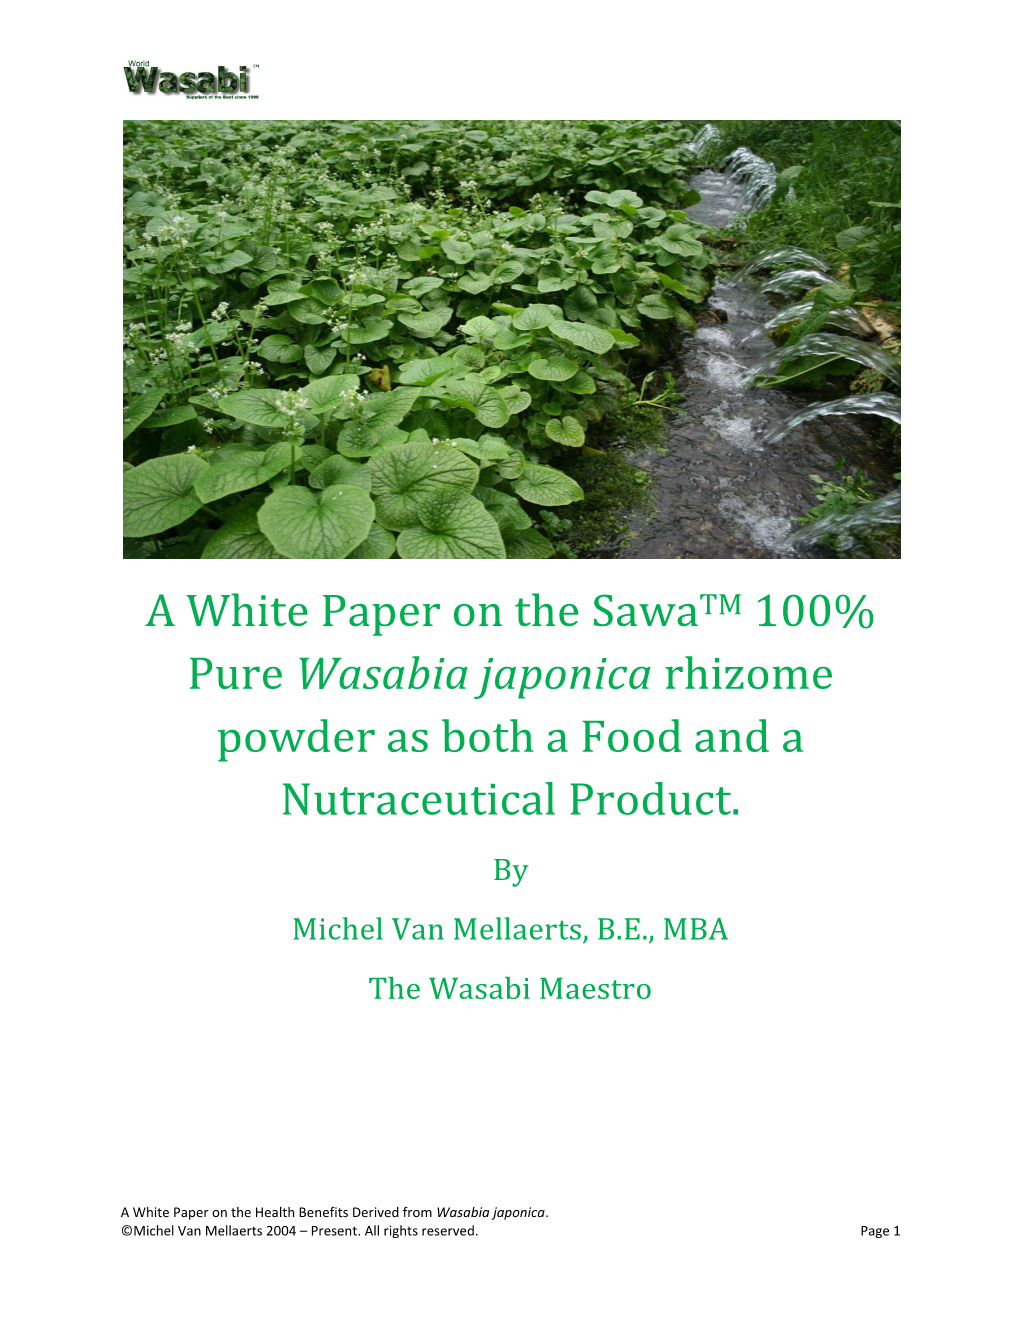 A White Paper on the Sawatm 100% Pure Wasabia Japonica Rhizome Powder As Both a Food and a Nutraceutical Product